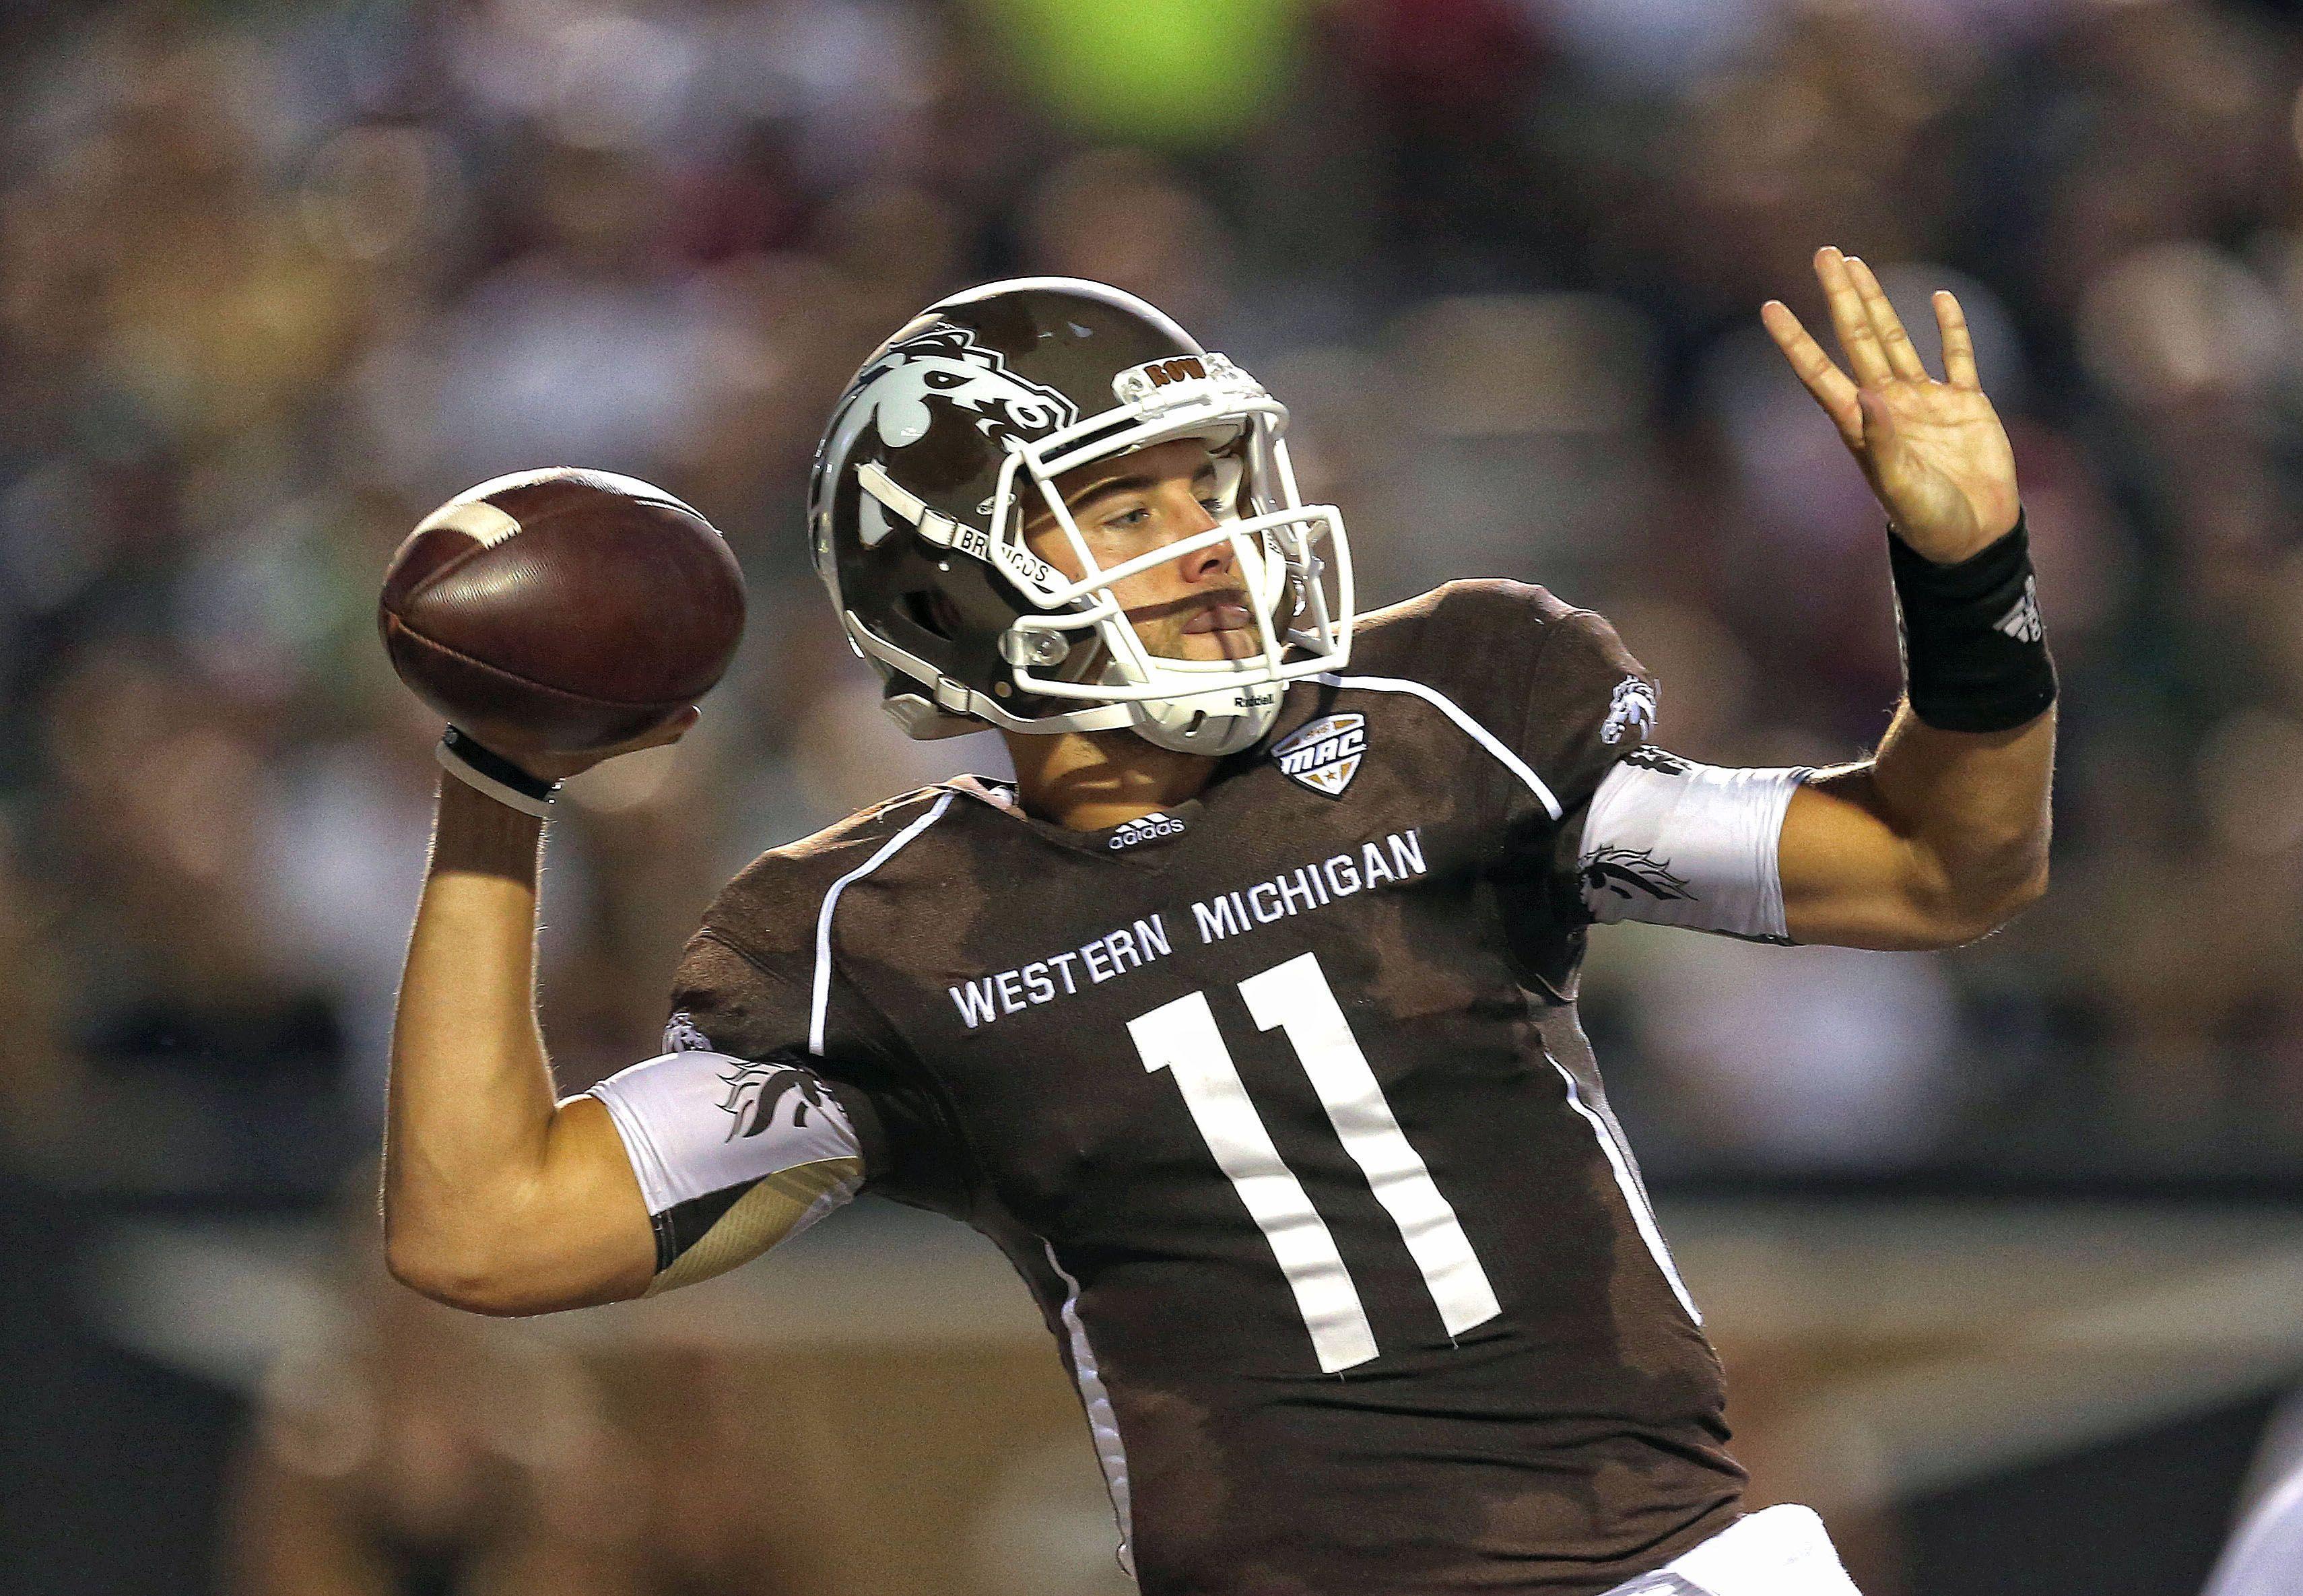 Western Michigan football is rising. Is this the year to finally